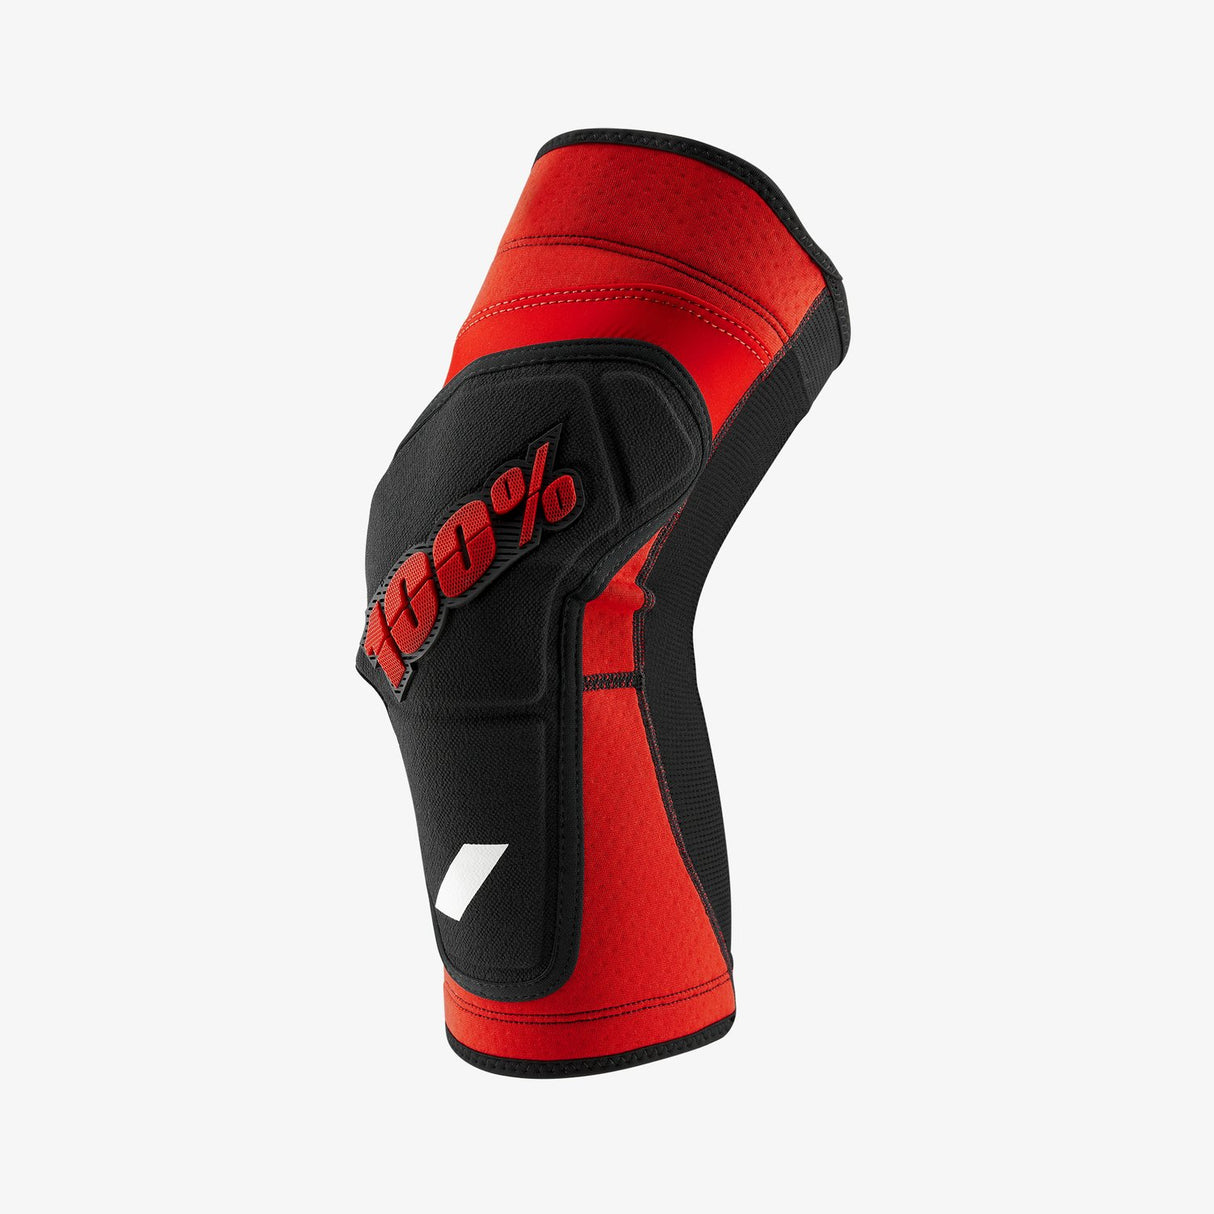 Ride 100% RIDECAMP Knee Guards/Pads, Color: Red/Black- Size SM